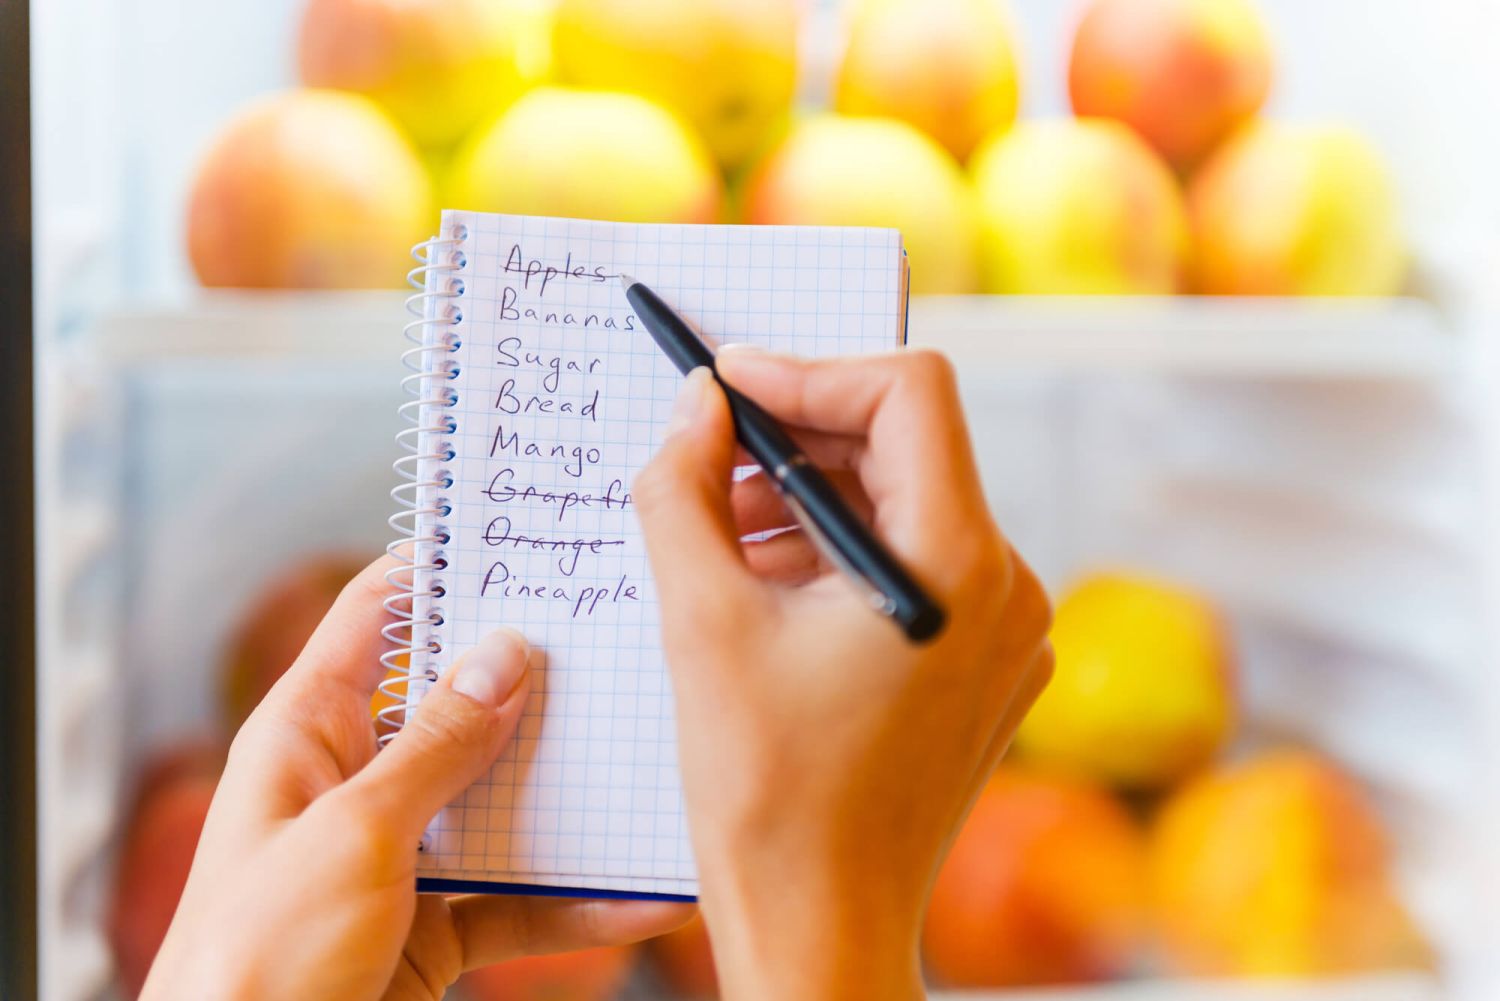 Shopping list with pencil and fridge in the background.